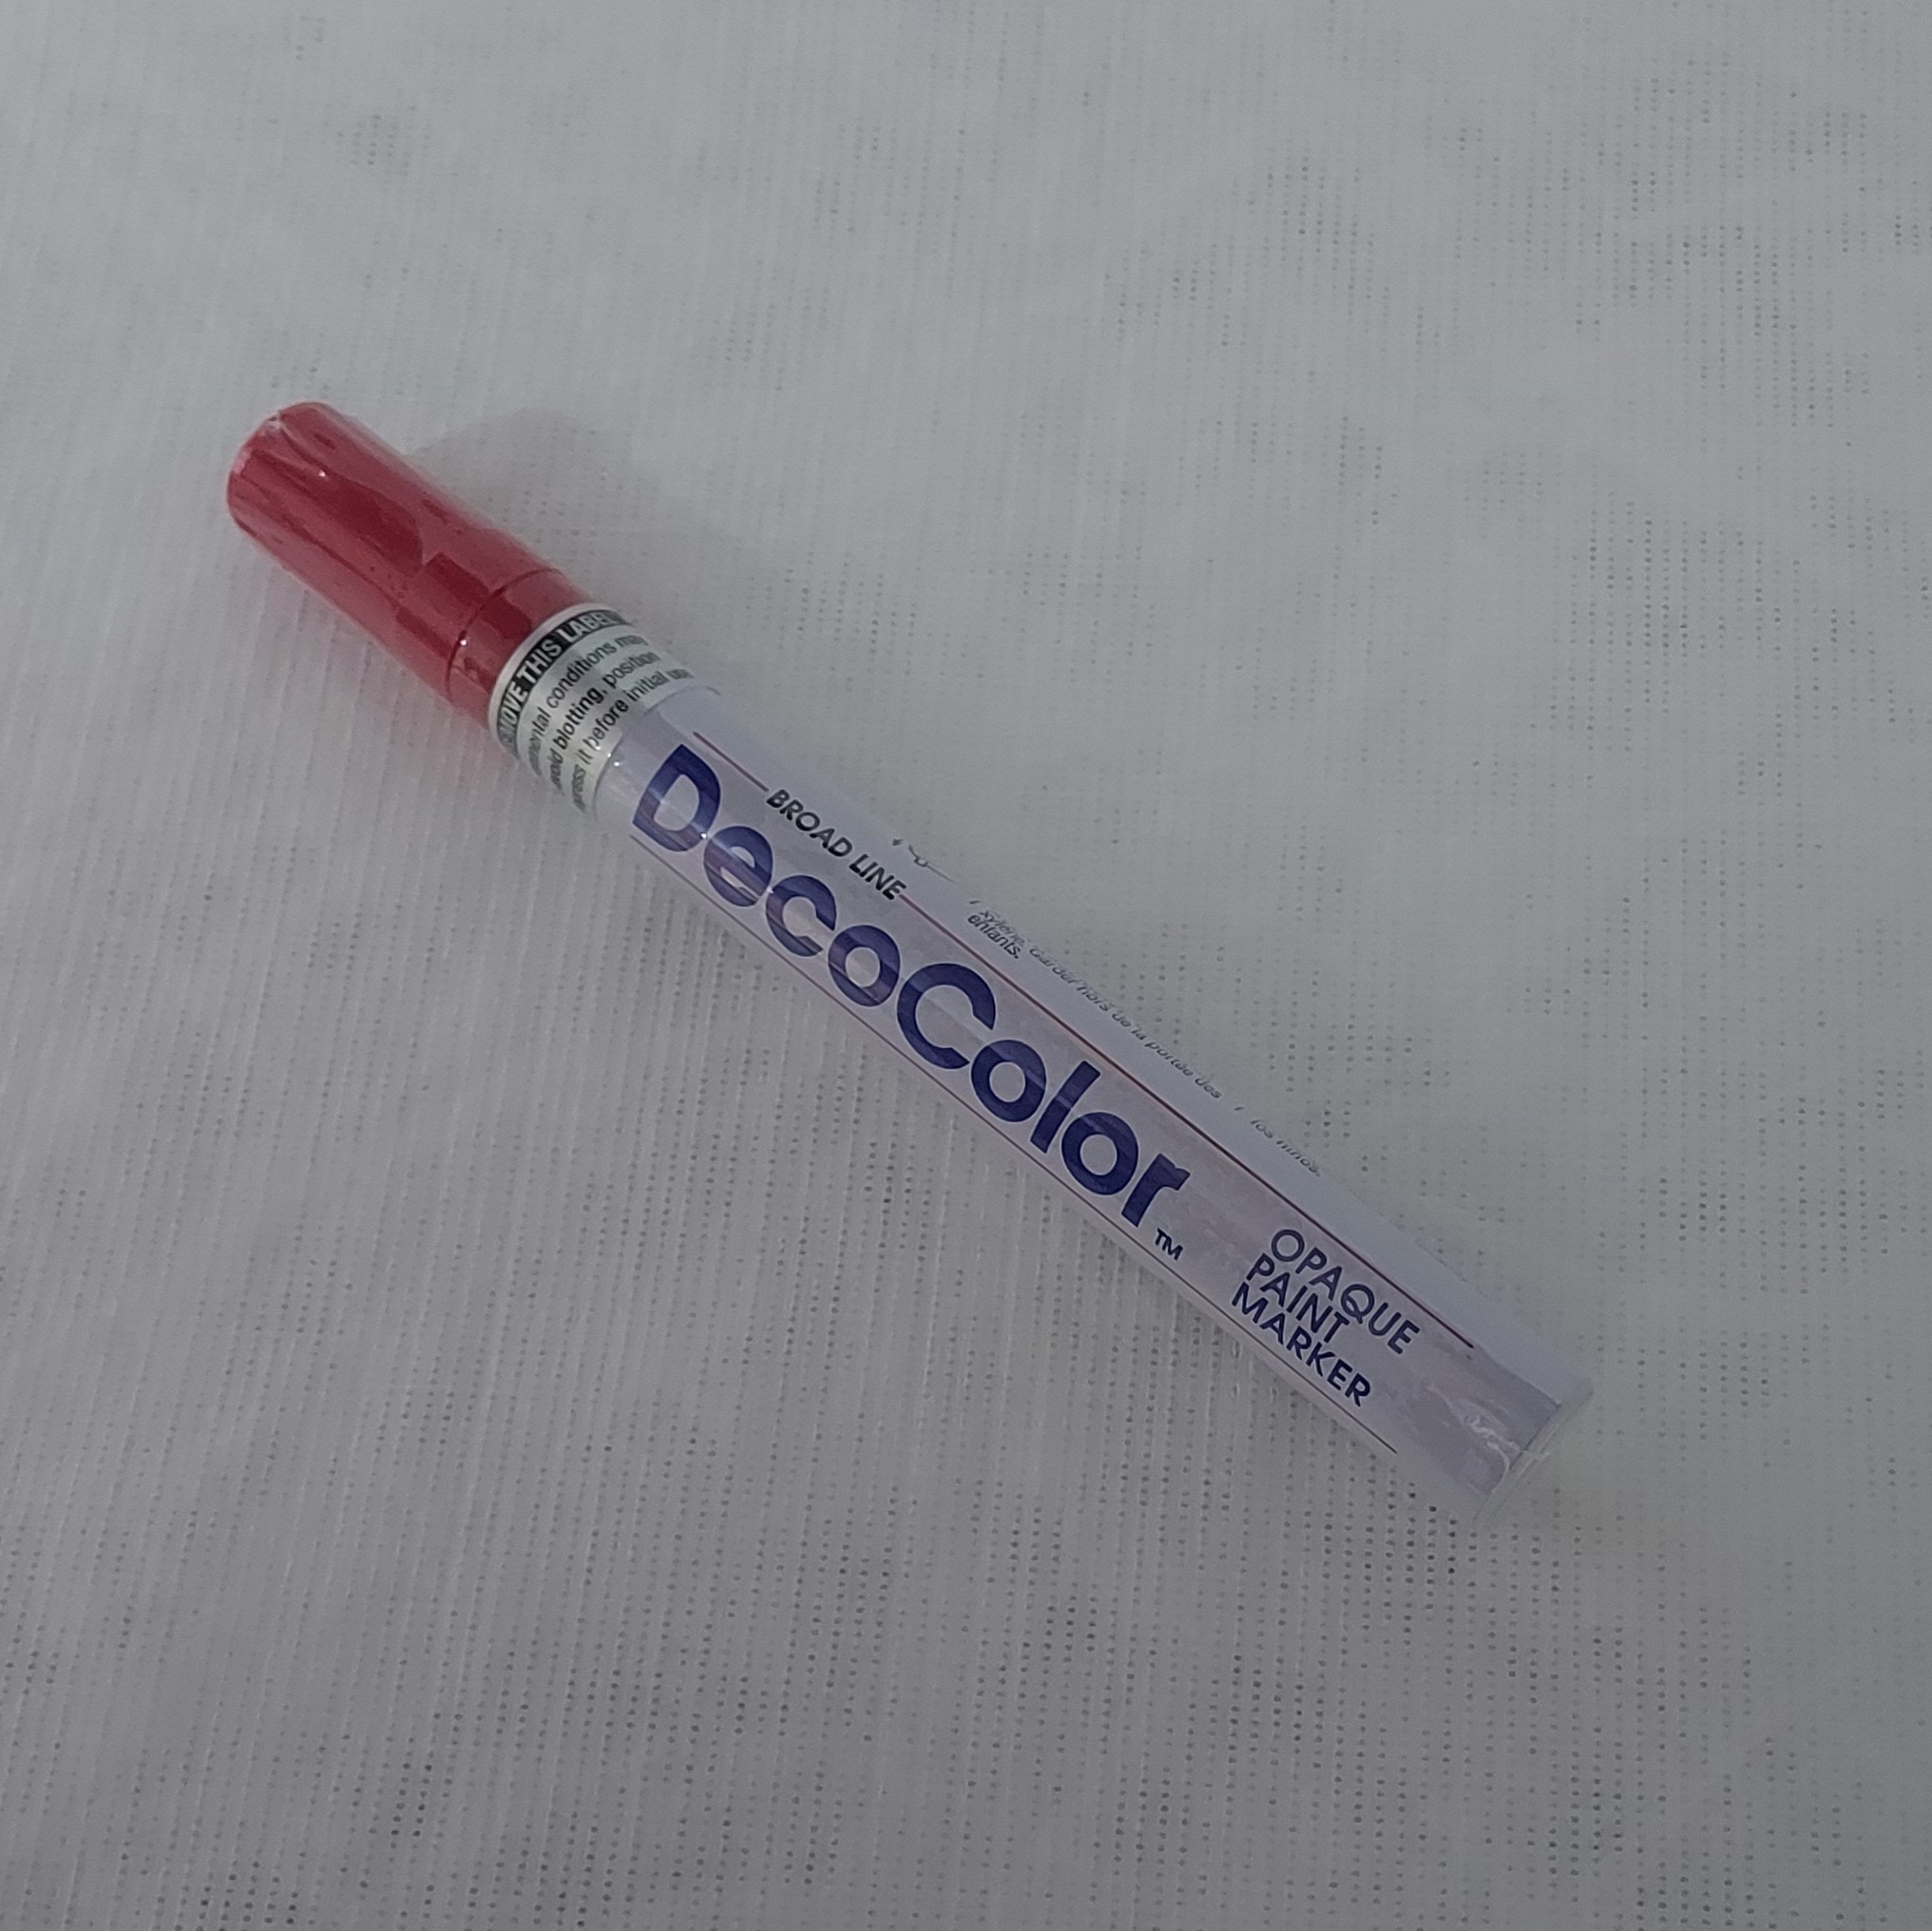 Decocolor Paint Pens for Cars Parts, Glass and Plastic - Broad